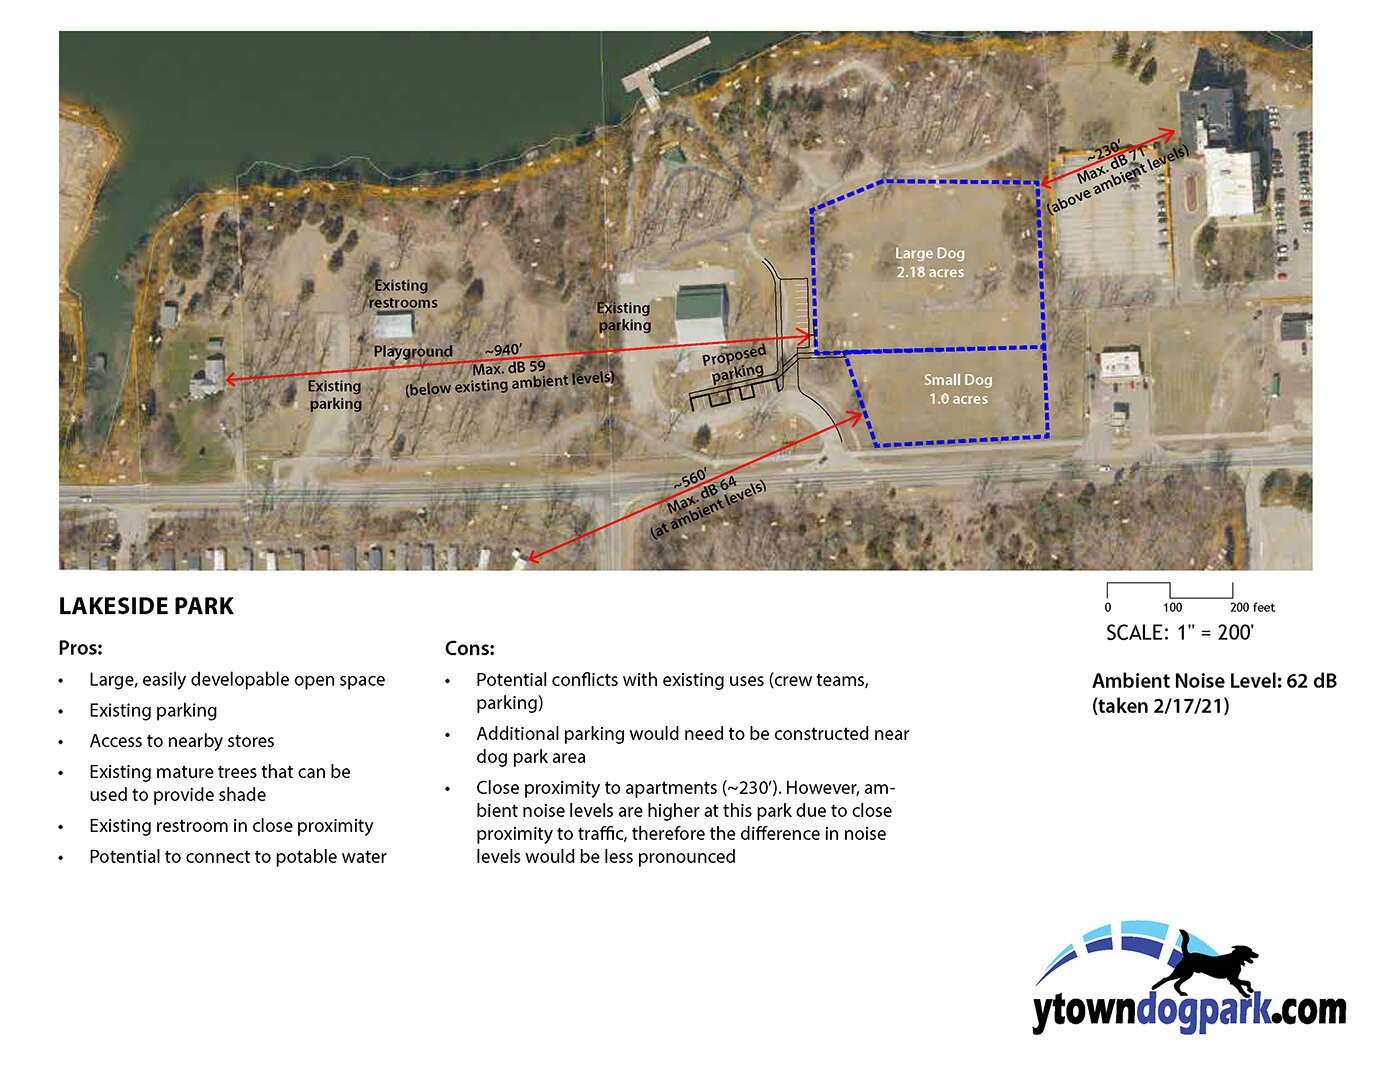 A map of the proposed dog park at Lakeside Park.